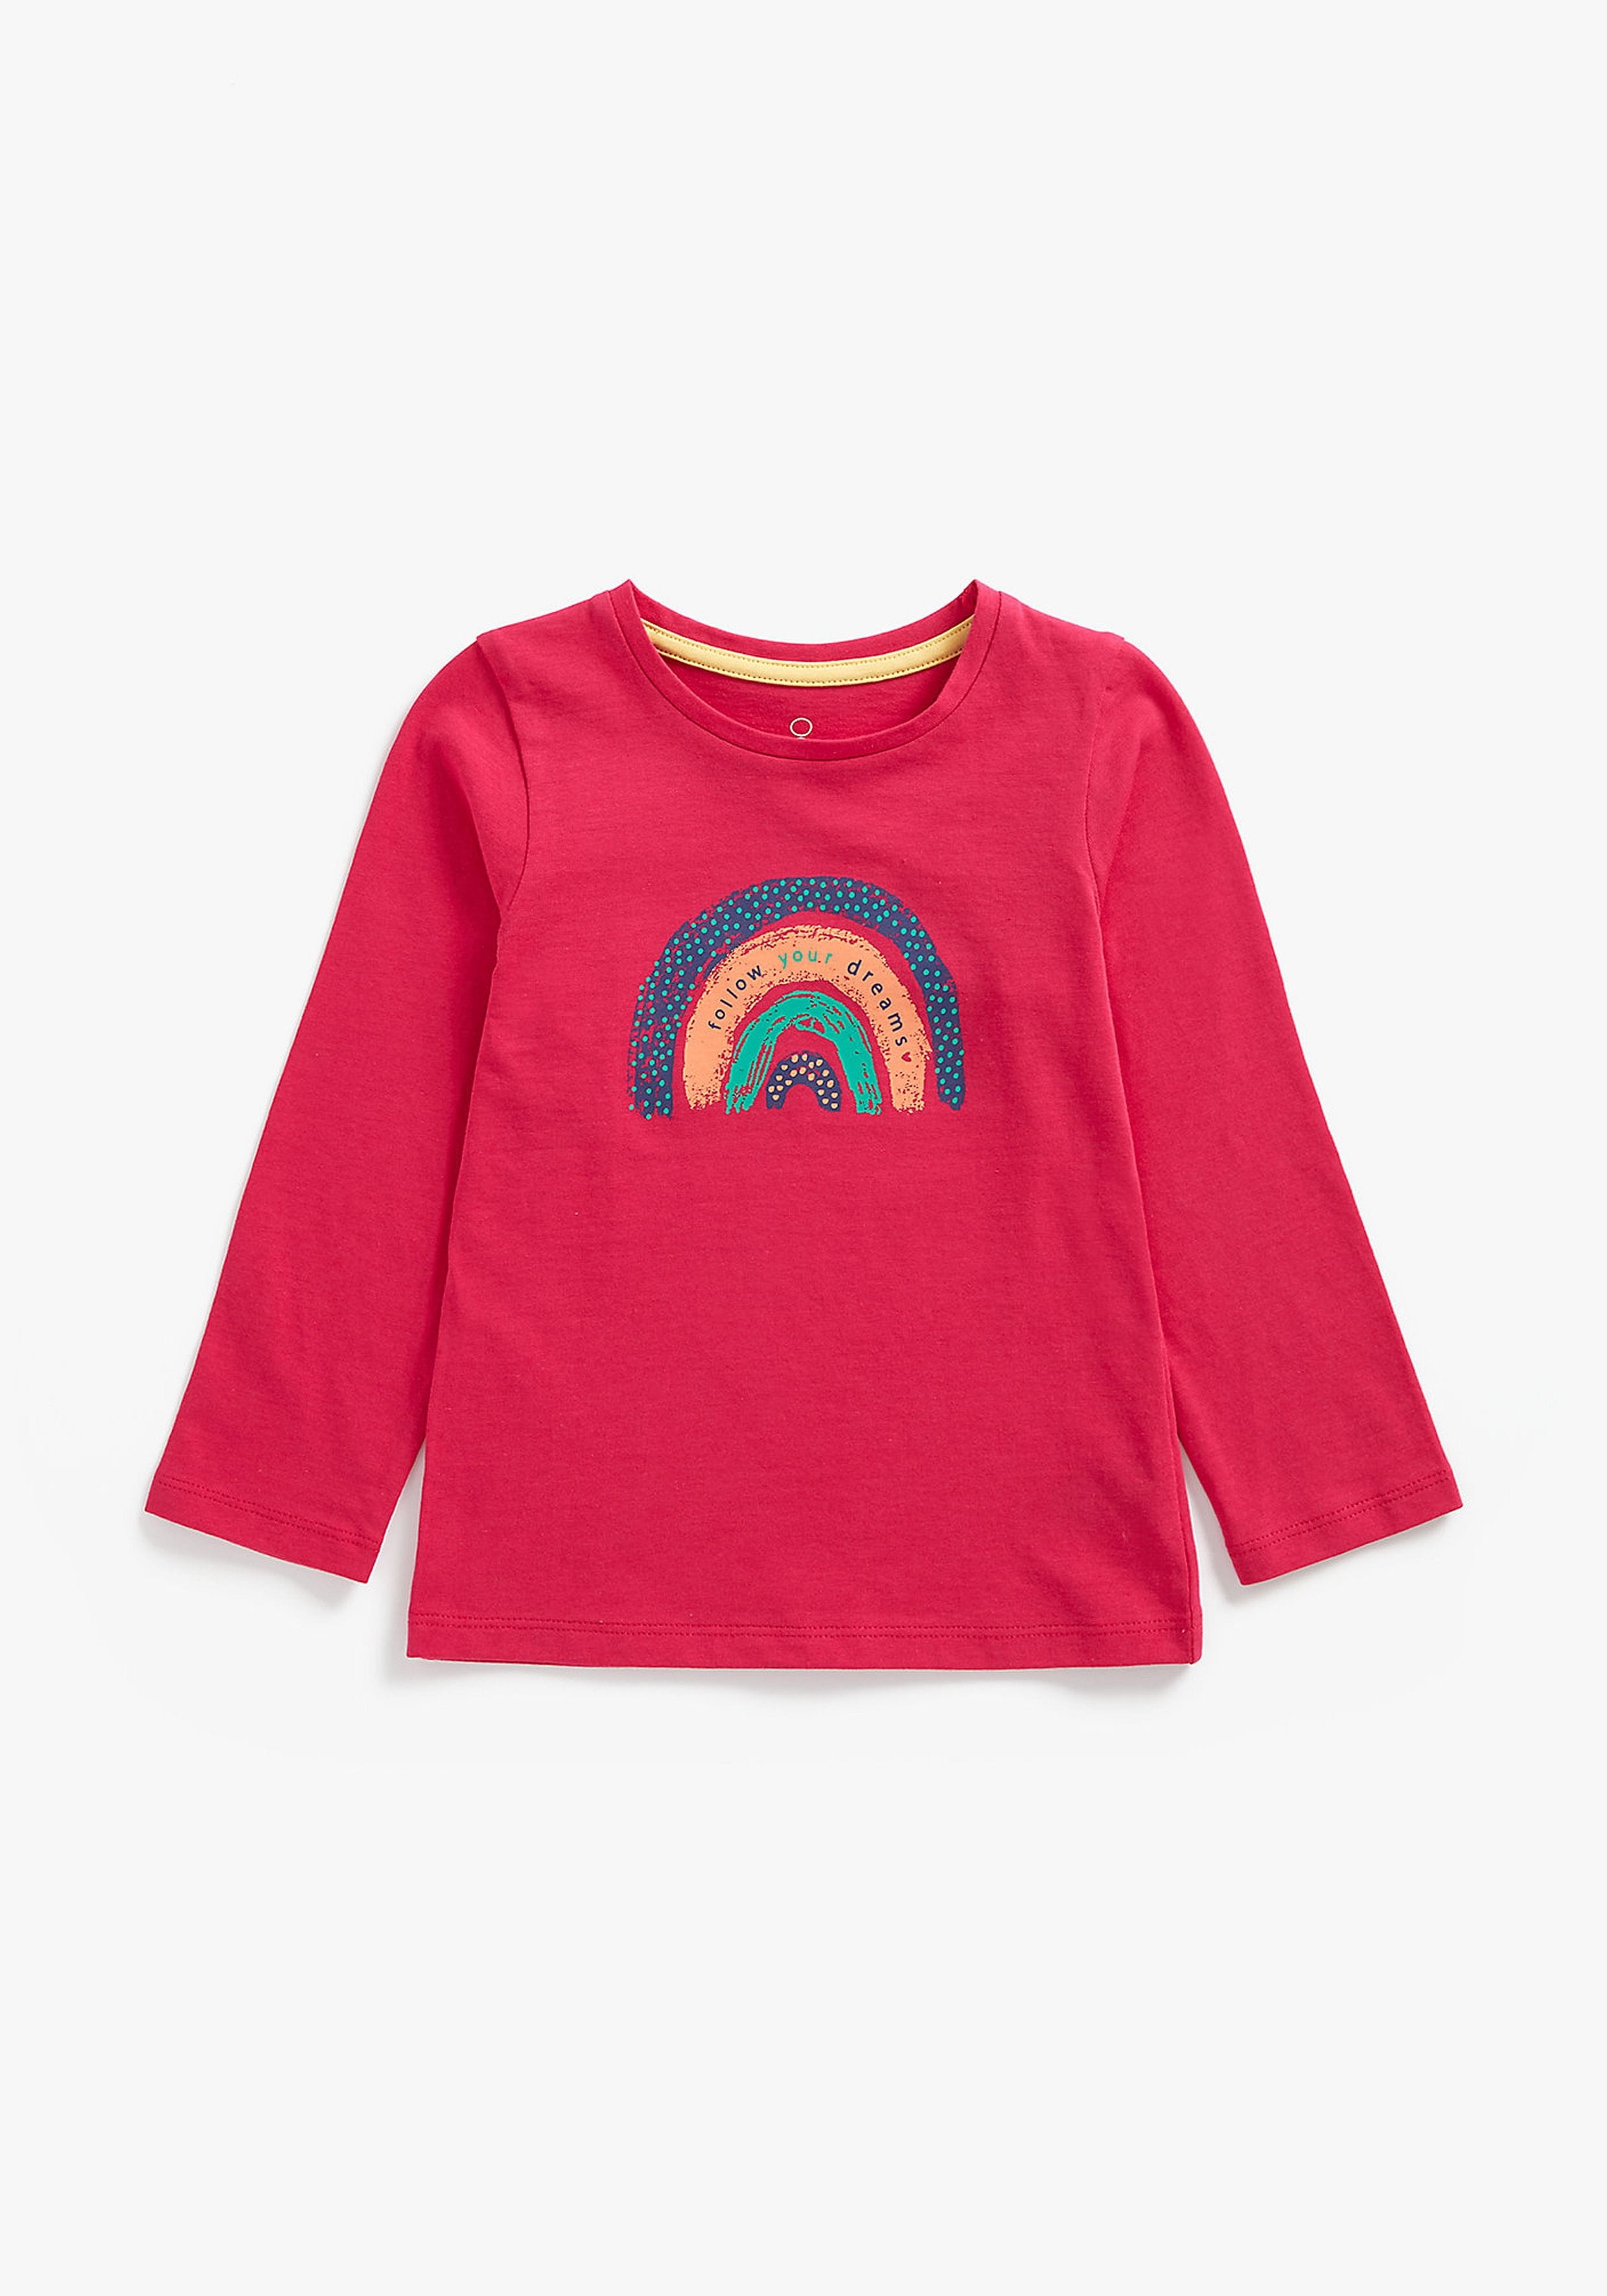 Mothercare | Girls Full Sleeves T-Shirt Rainbow With Text Print - Red 0